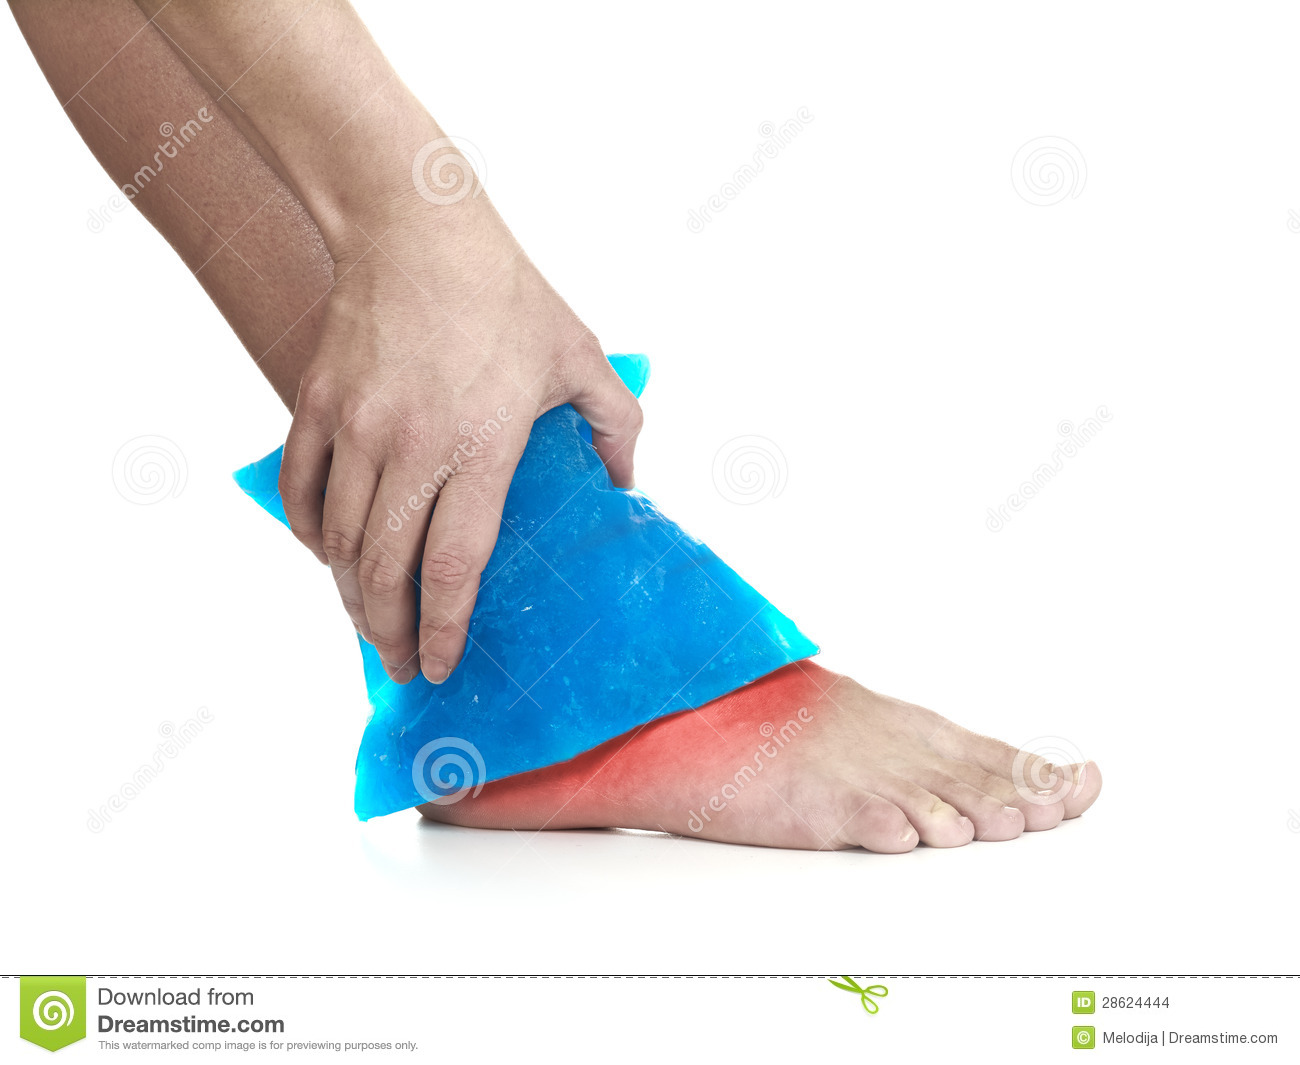 Cool Gel Pack On A Swollen Hurting Ankle  Stock Images   Image    